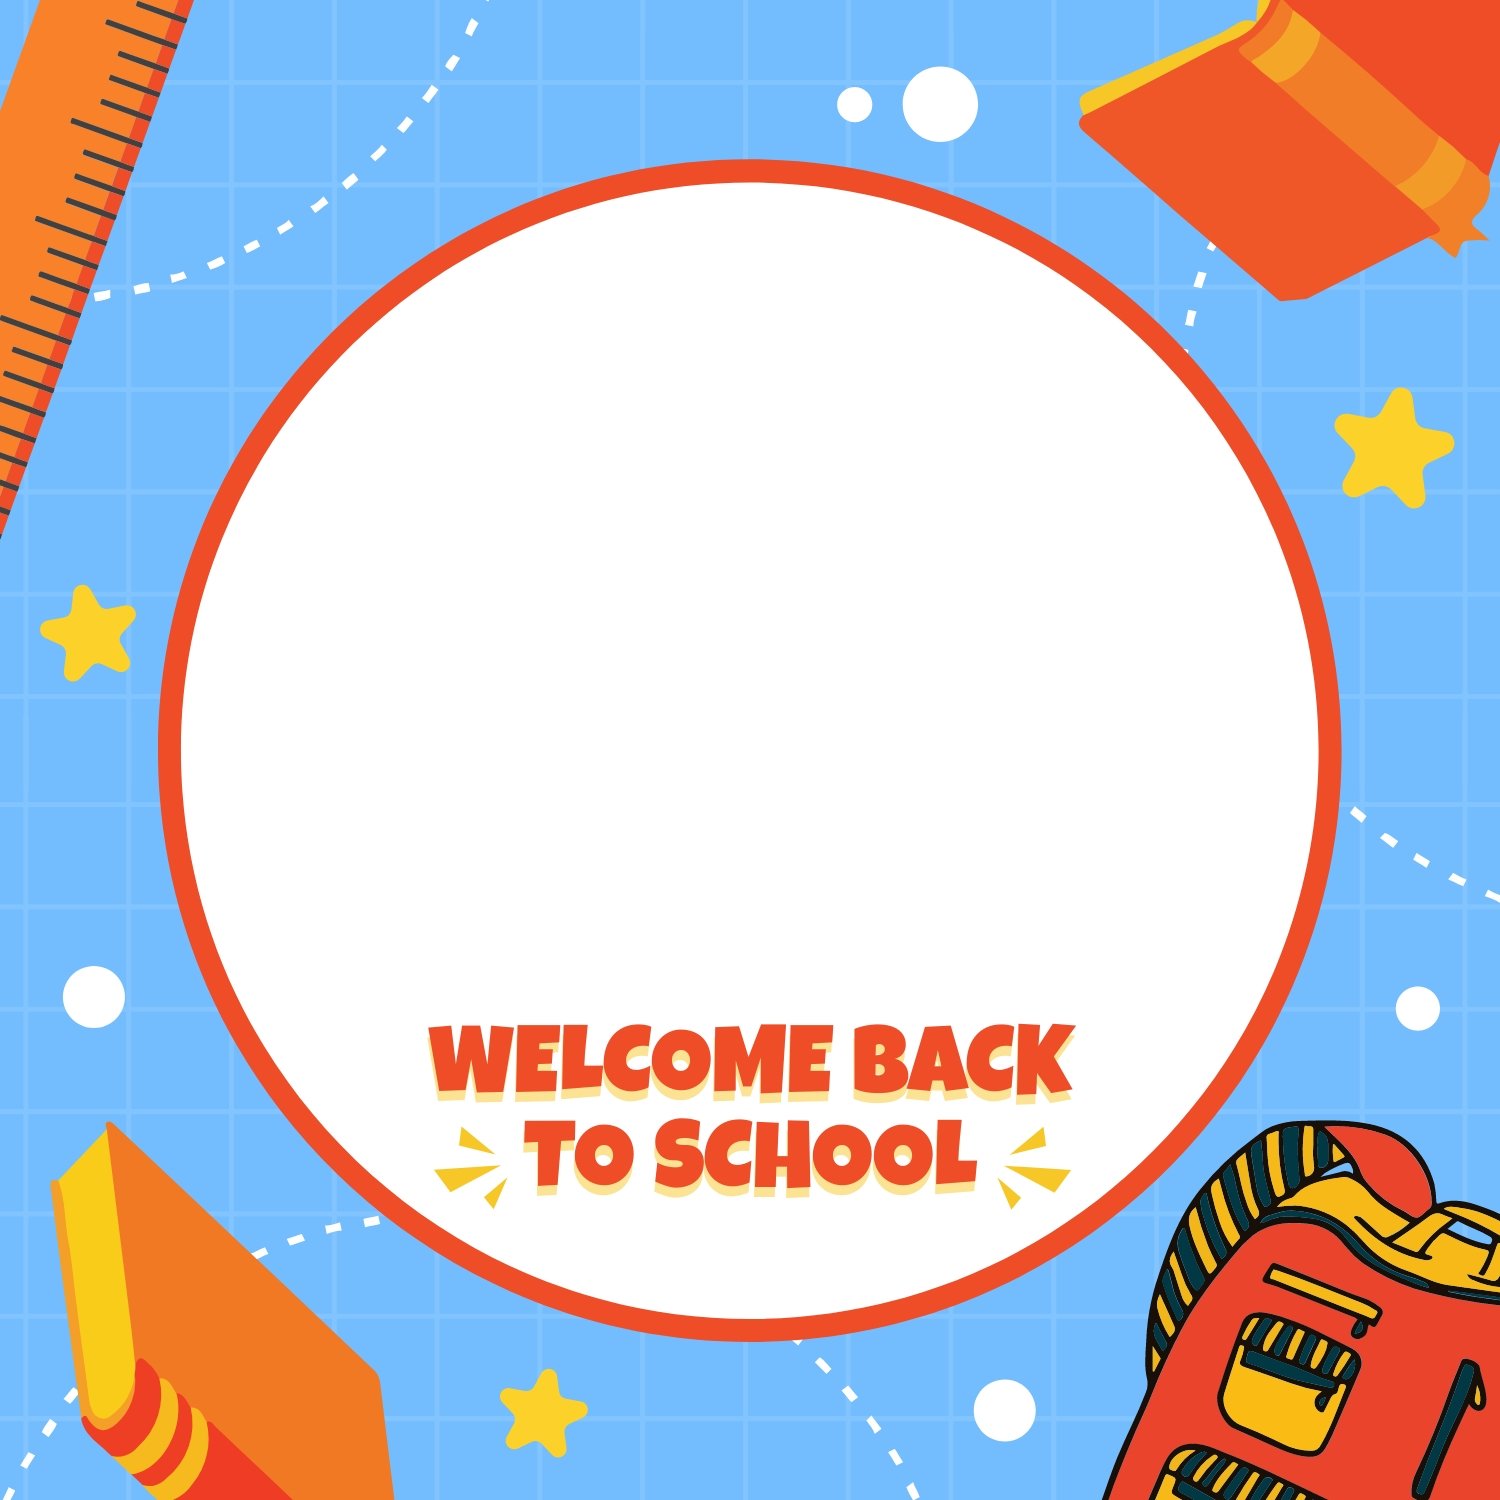 Back to School Facebook Profile Frame Template